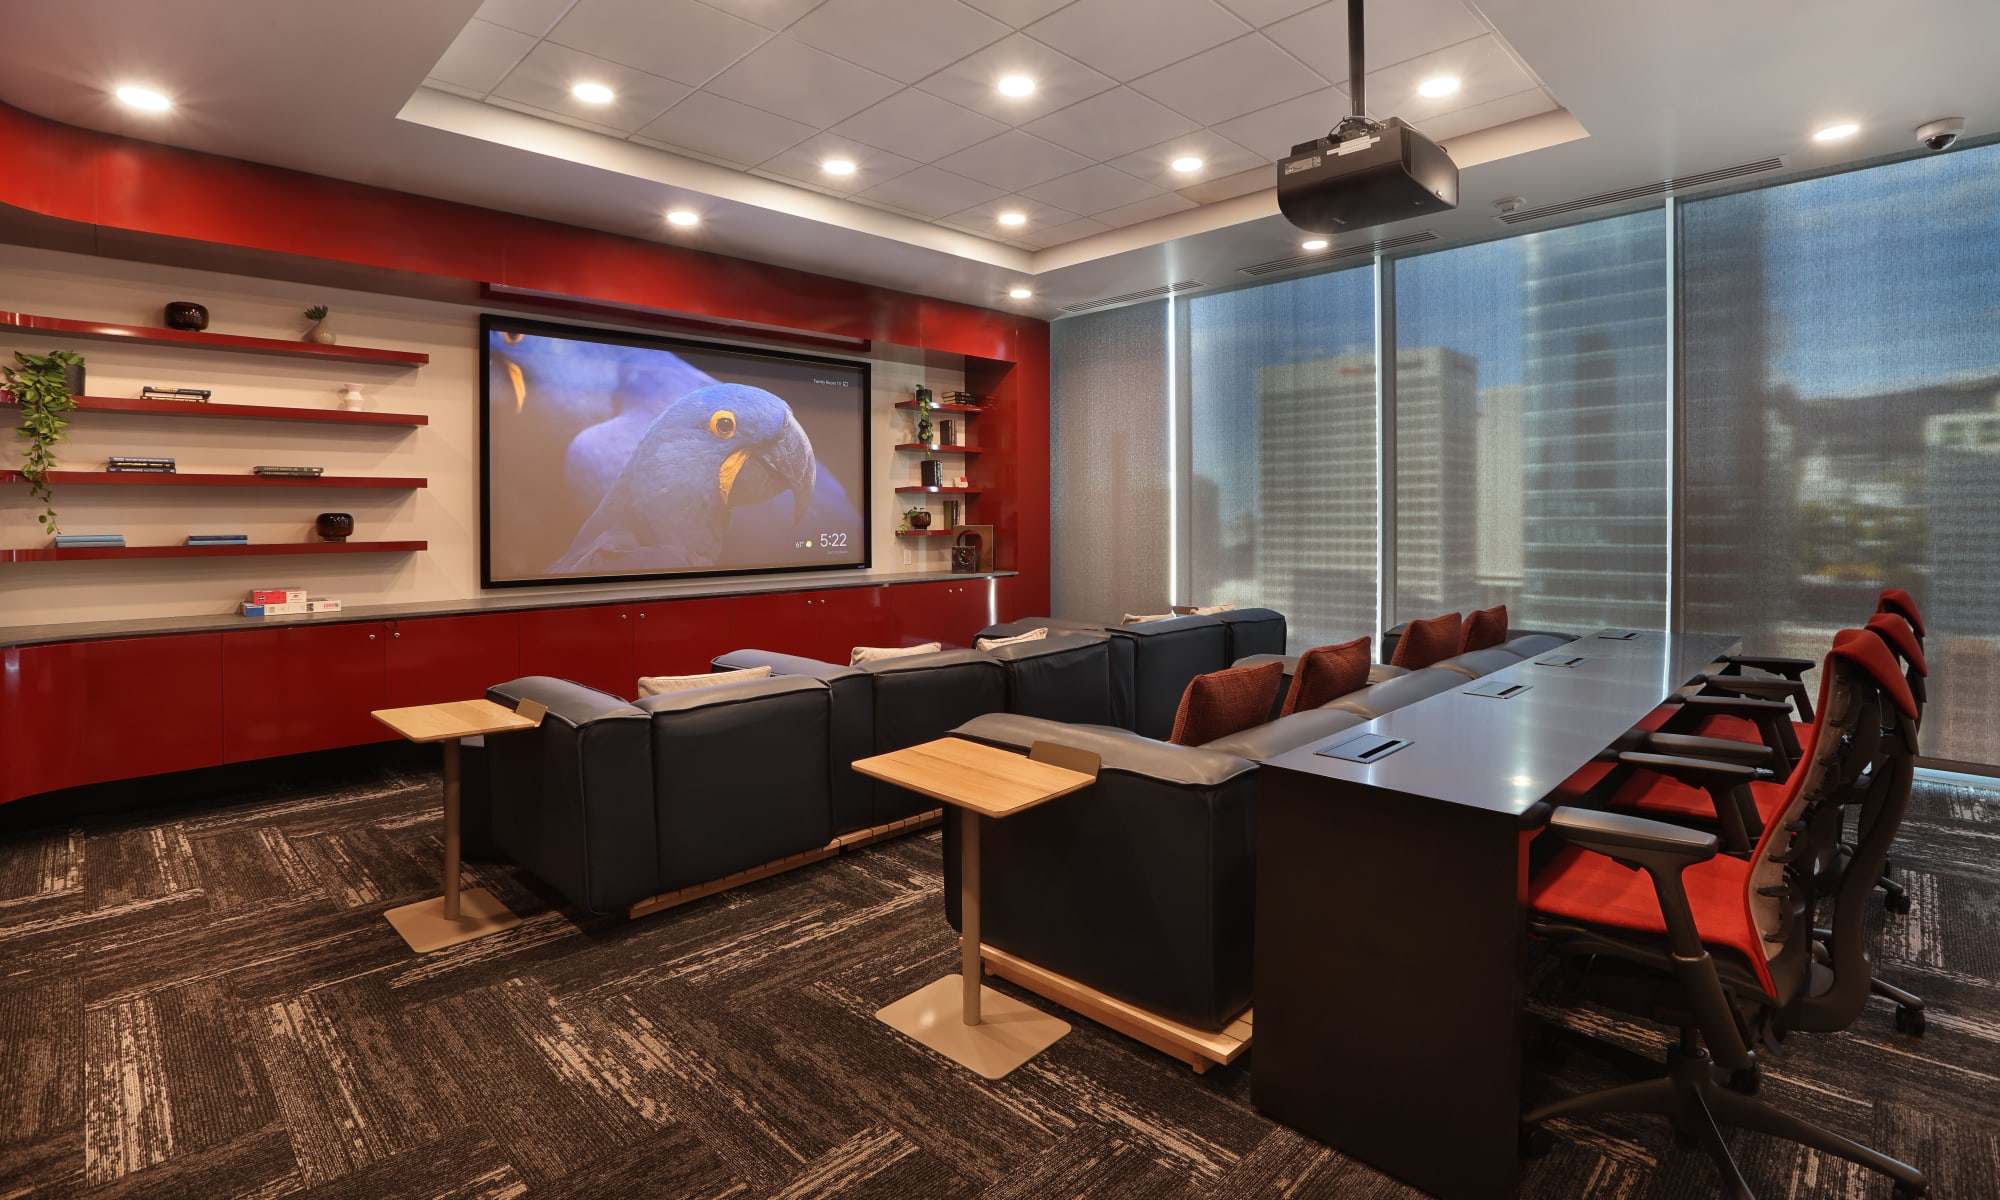 21st floor theater with comfortable seating, pillows and a workspace at Luxury high-rise community of Liberty SKY in Salt Lake City, Utah